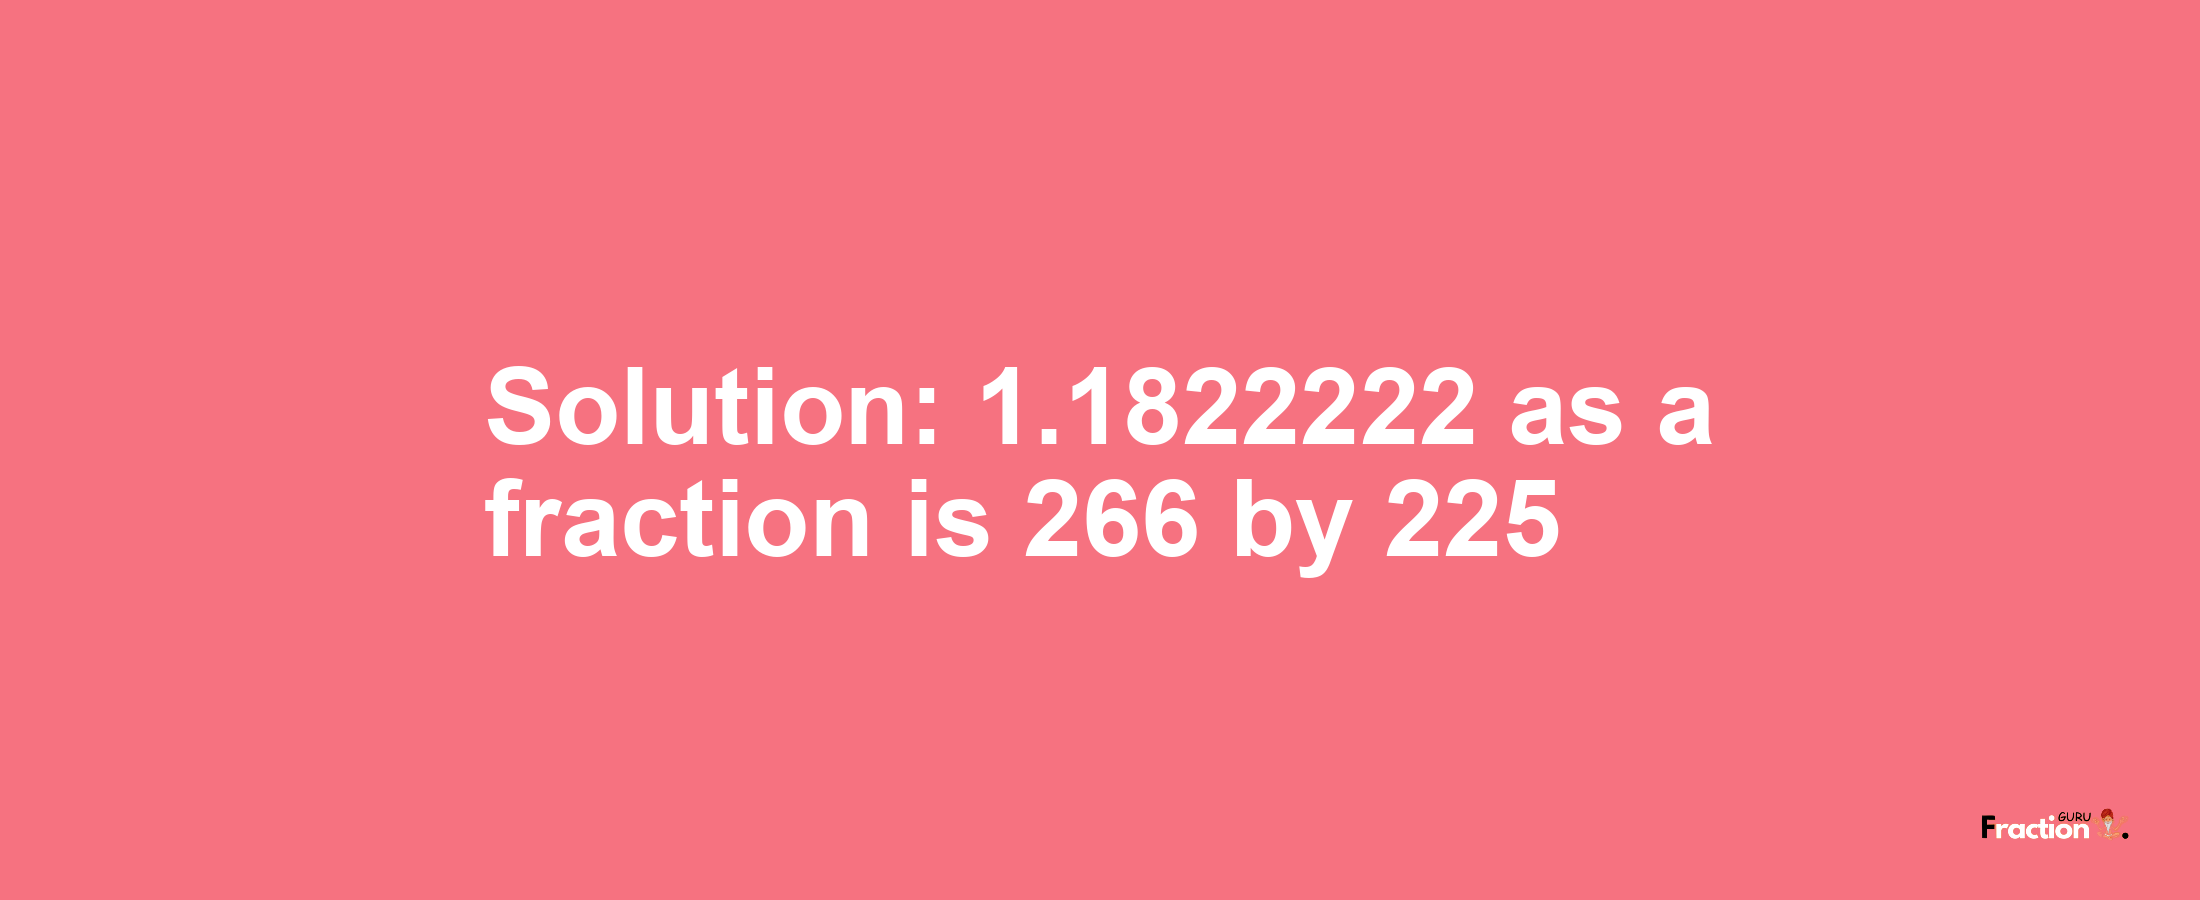 Solution:1.1822222 as a fraction is 266/225